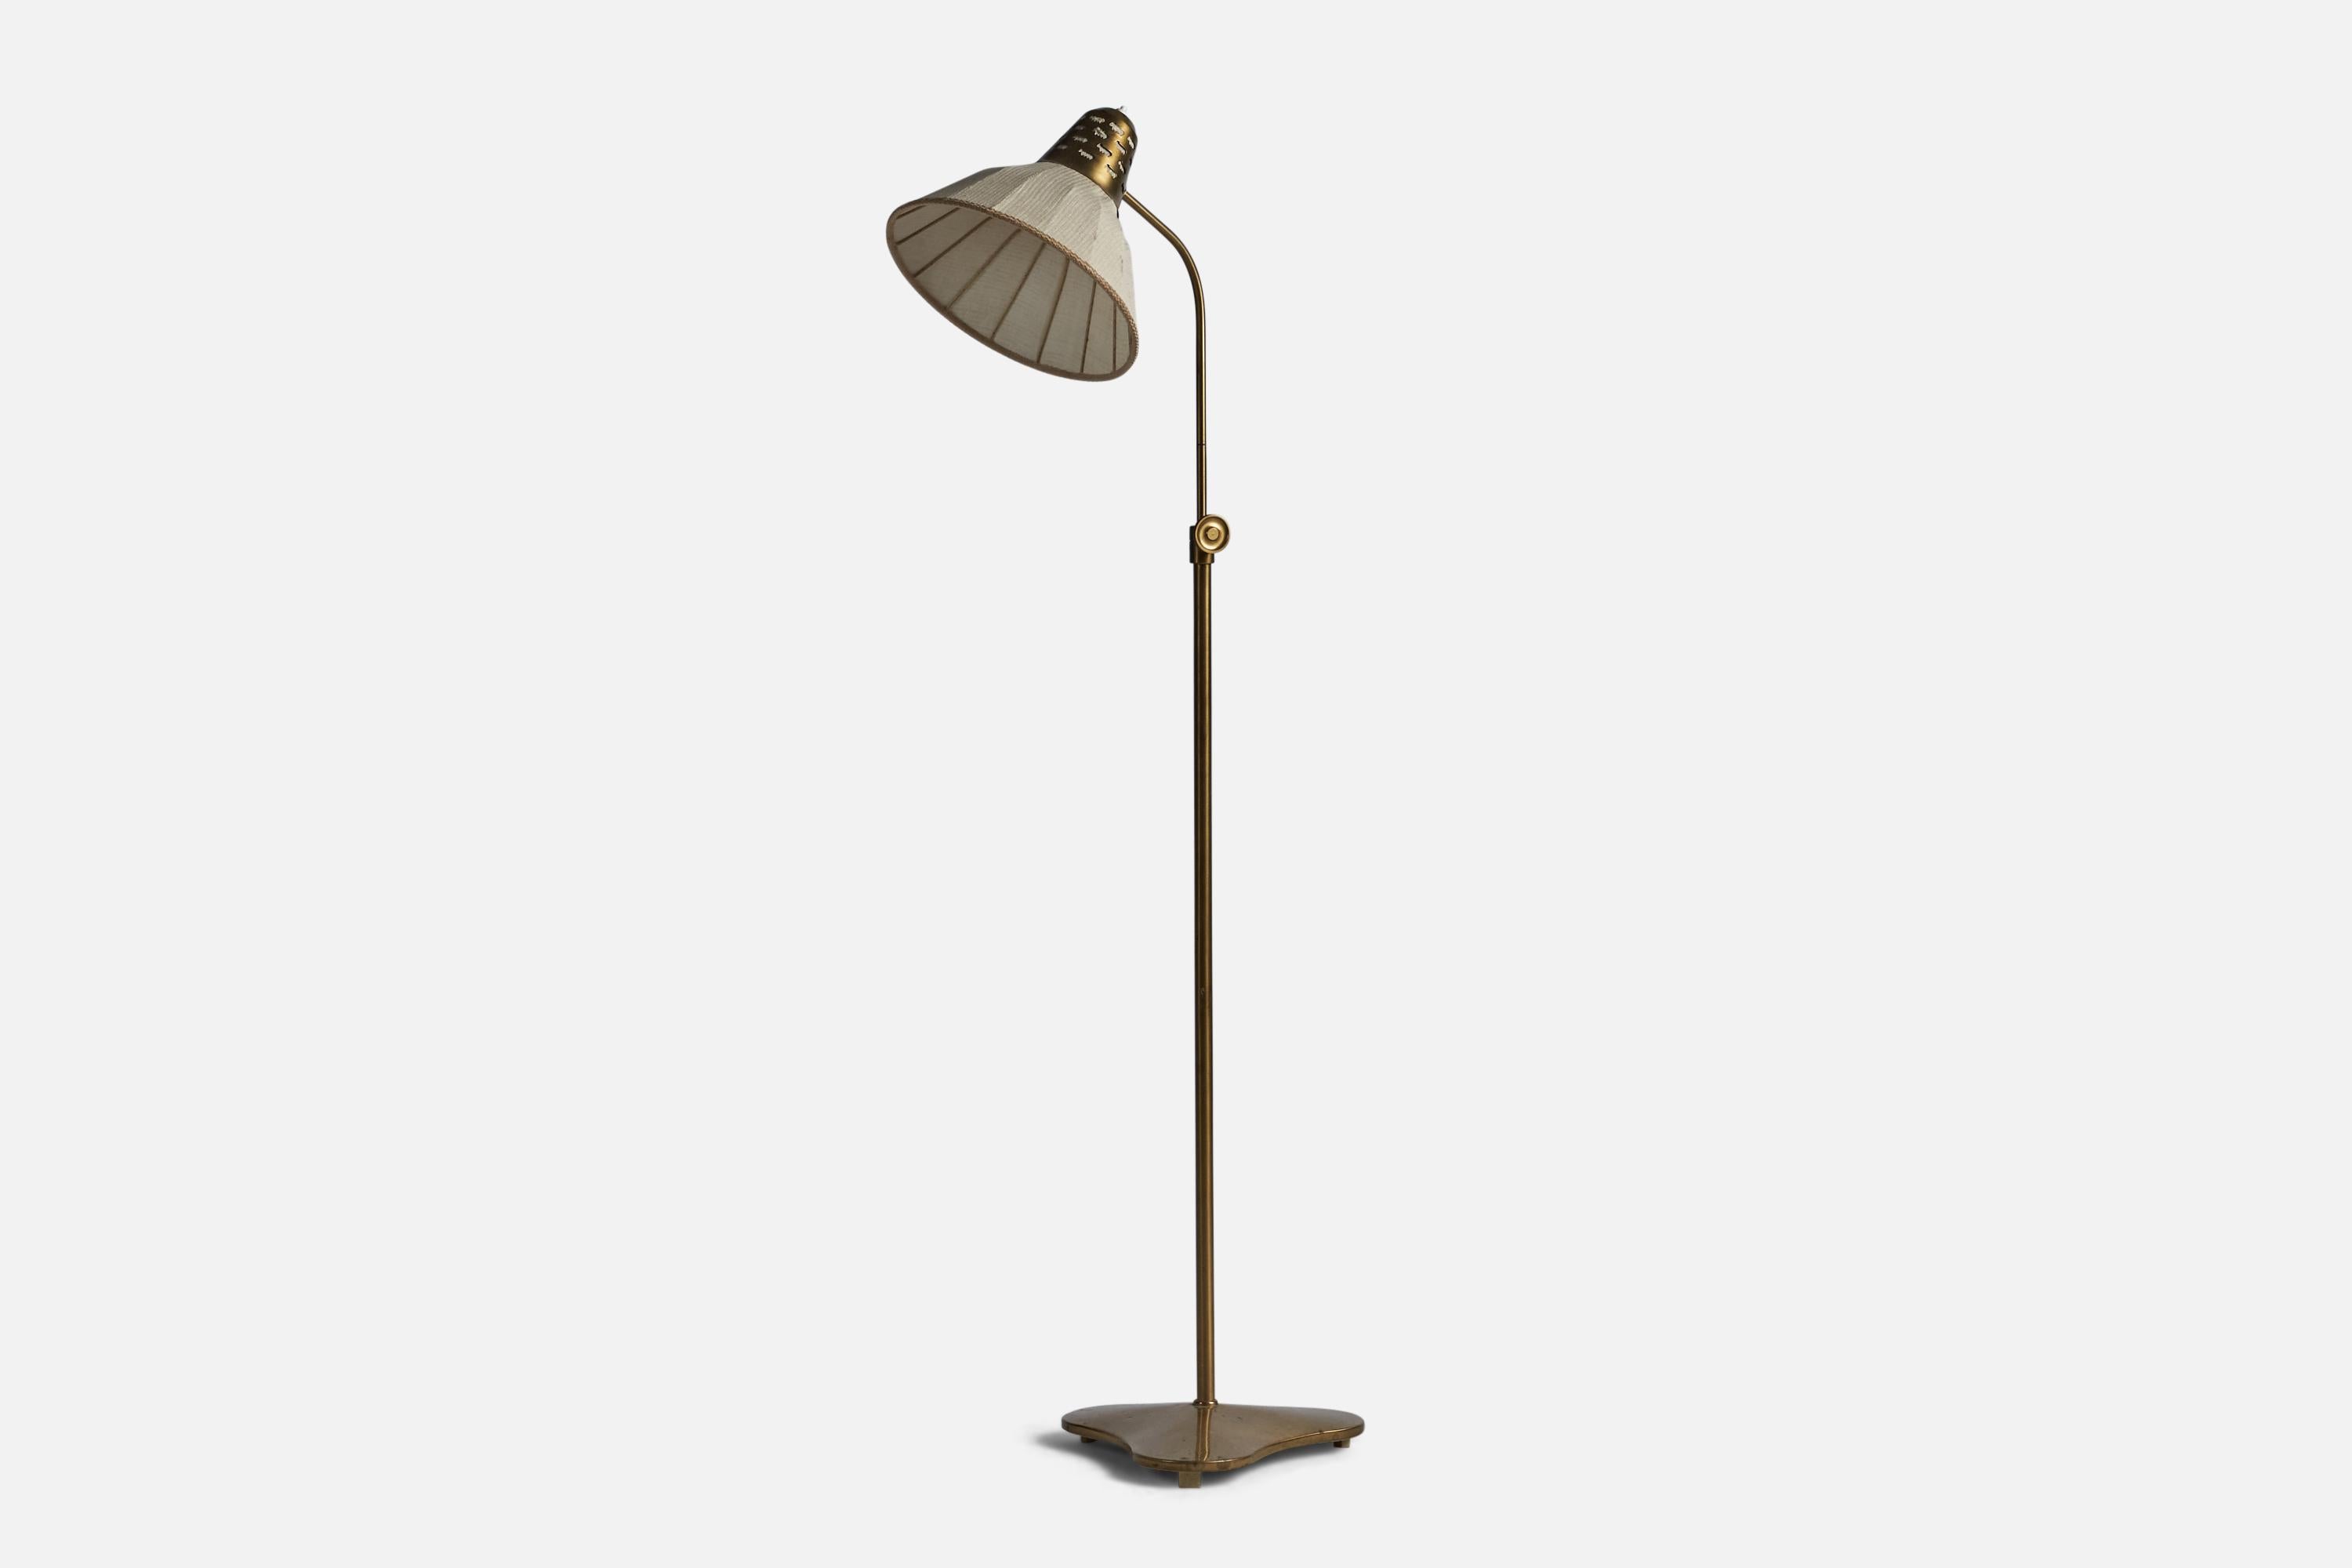 An adjustable brass and fabric floor lamp designed by Hans Bergström and produced by ASEA, Sweden, 1940s.

Overall Dimensions (inches): 52.5” H x 12” W x 20” D
Bulb Specifications: E-26 Bulb
Number of Sockets: 1
All lighting will be converted for US